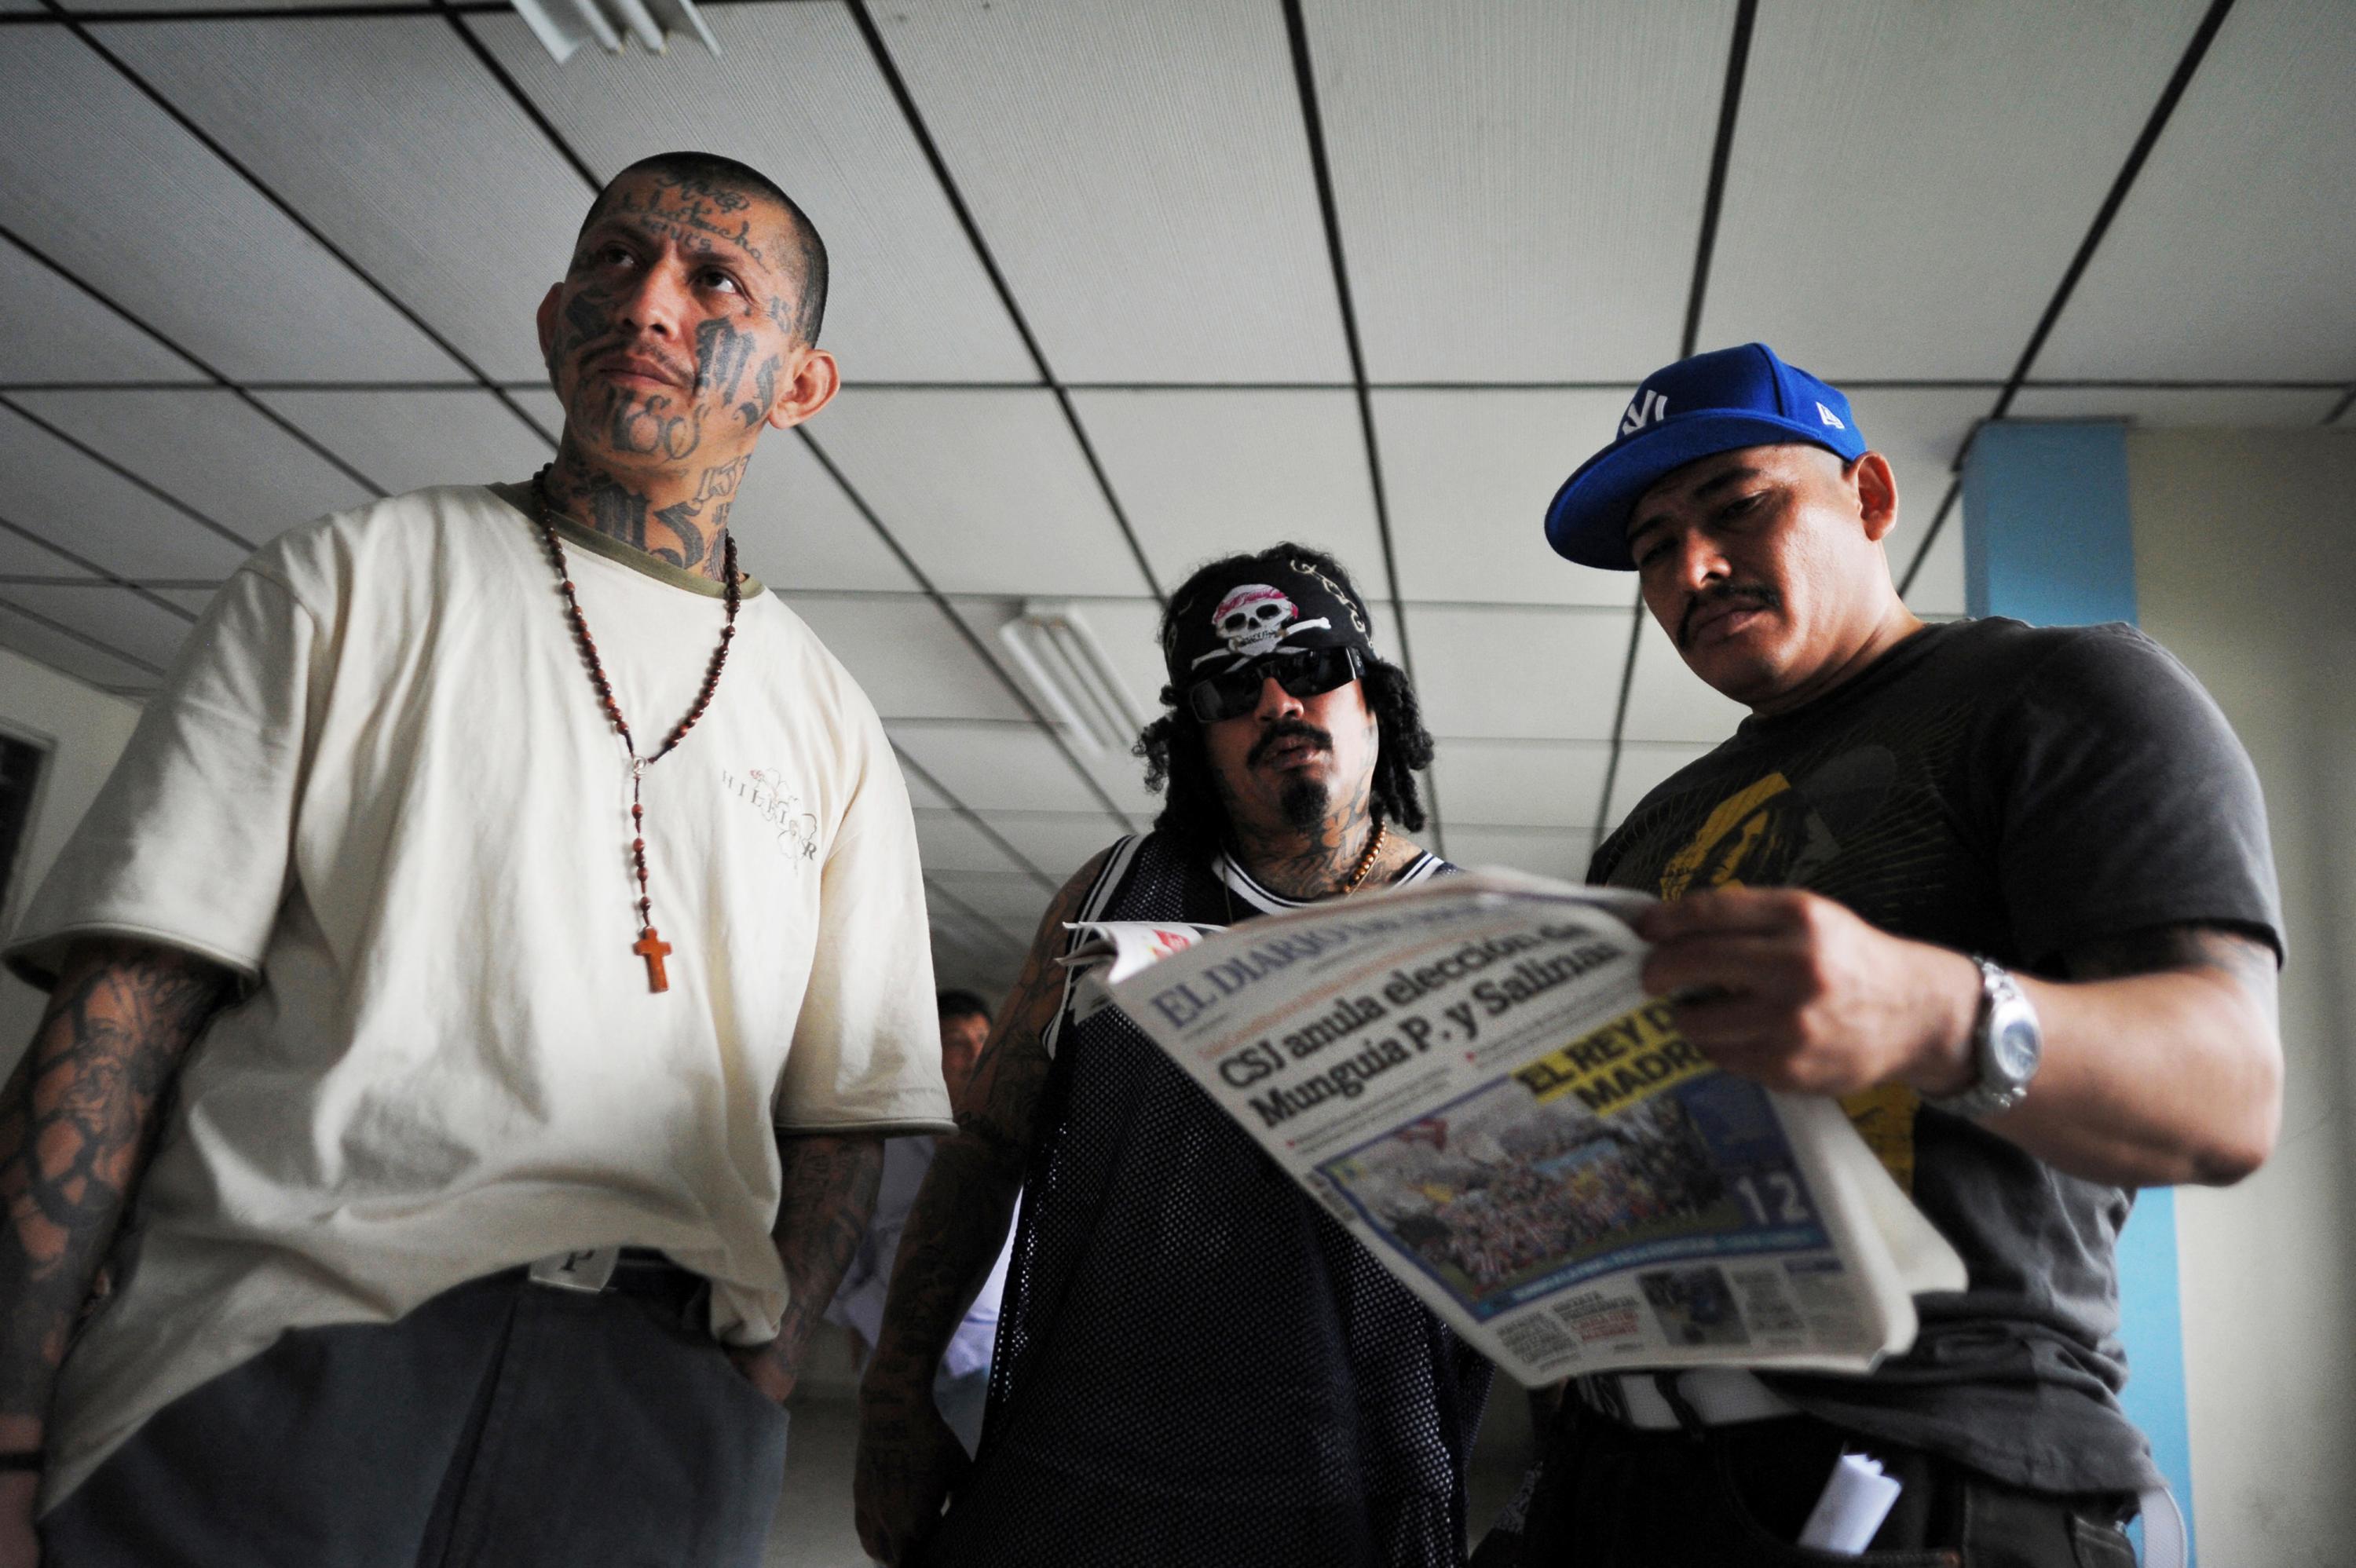 Élmer Canales Rivera, Crook, reads the newspaper next to fellow MS-13 leaders Saúl Antonio Turcios and Tiberio Ramírez (left), after a press conference related to The Truce on May 18, 2013. Photo José Cabezas/AFP